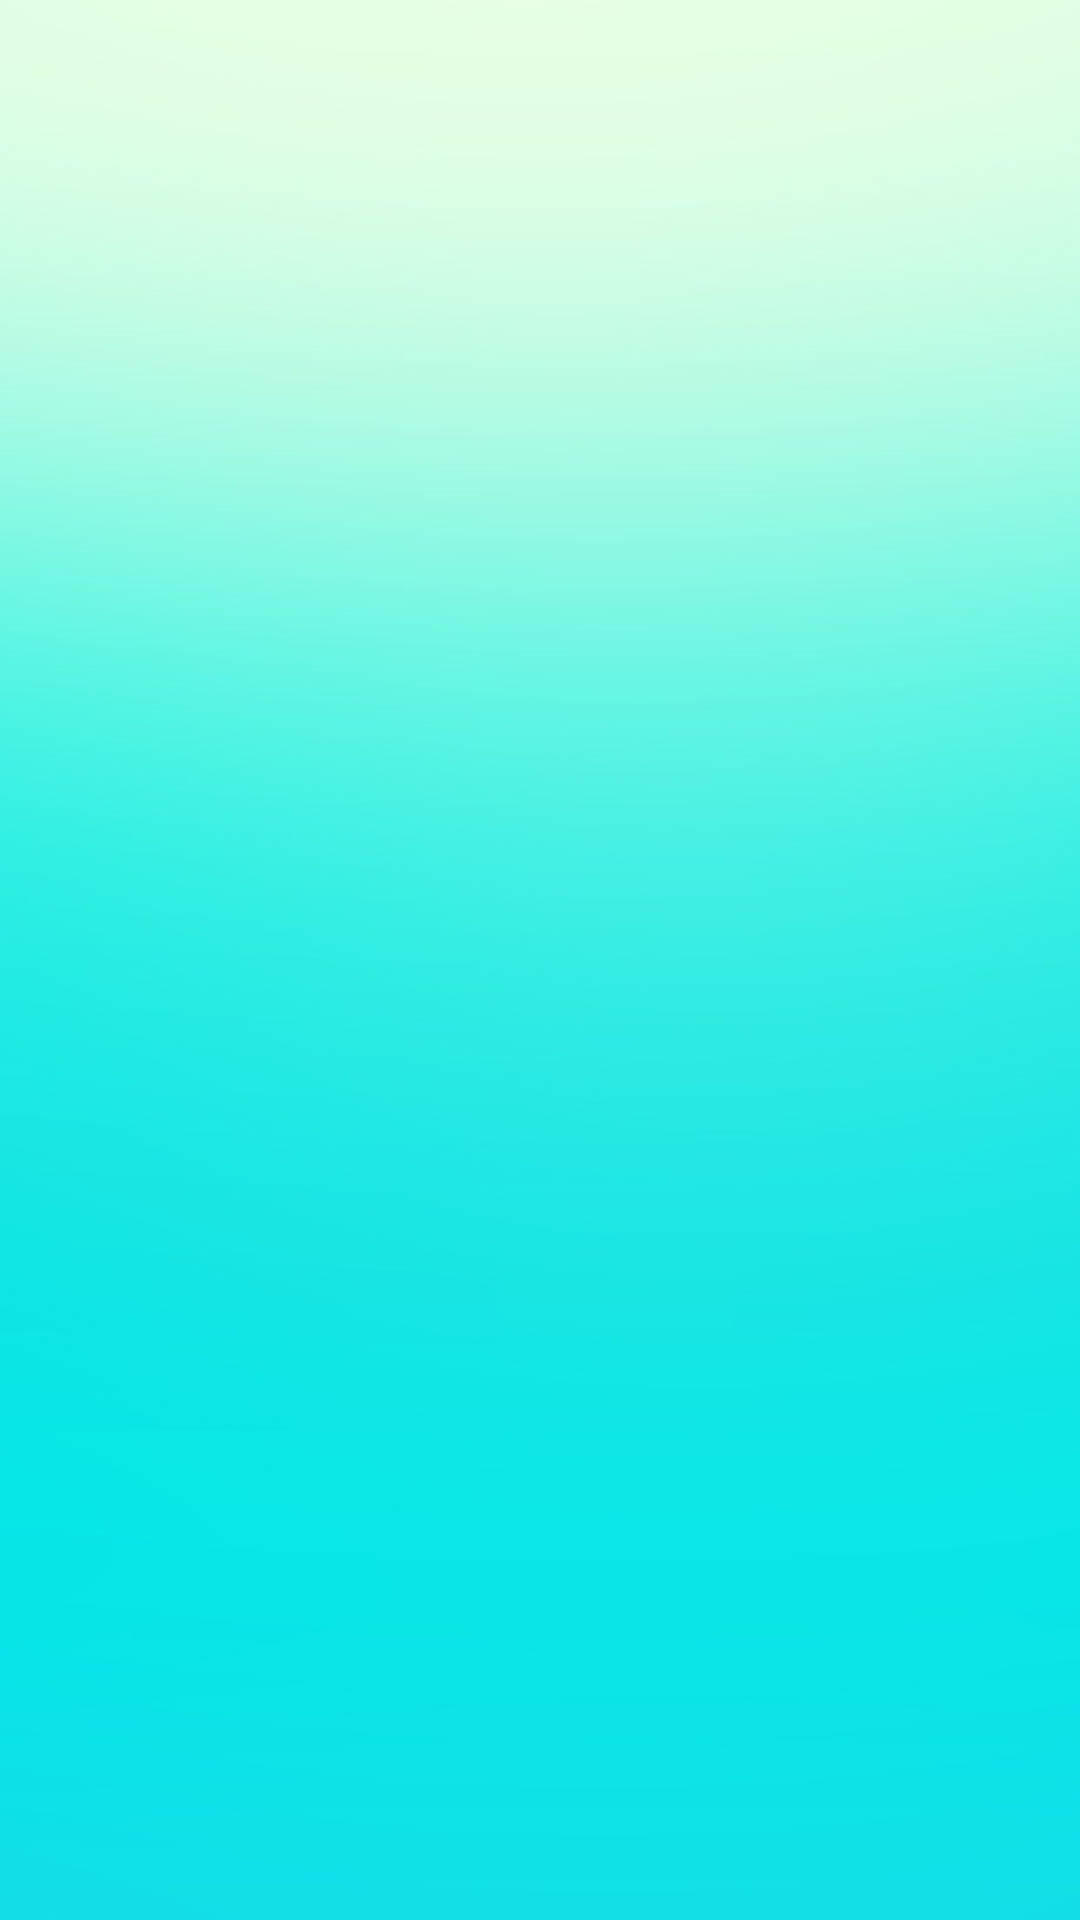 Gradient Pastel Green And Blue Background